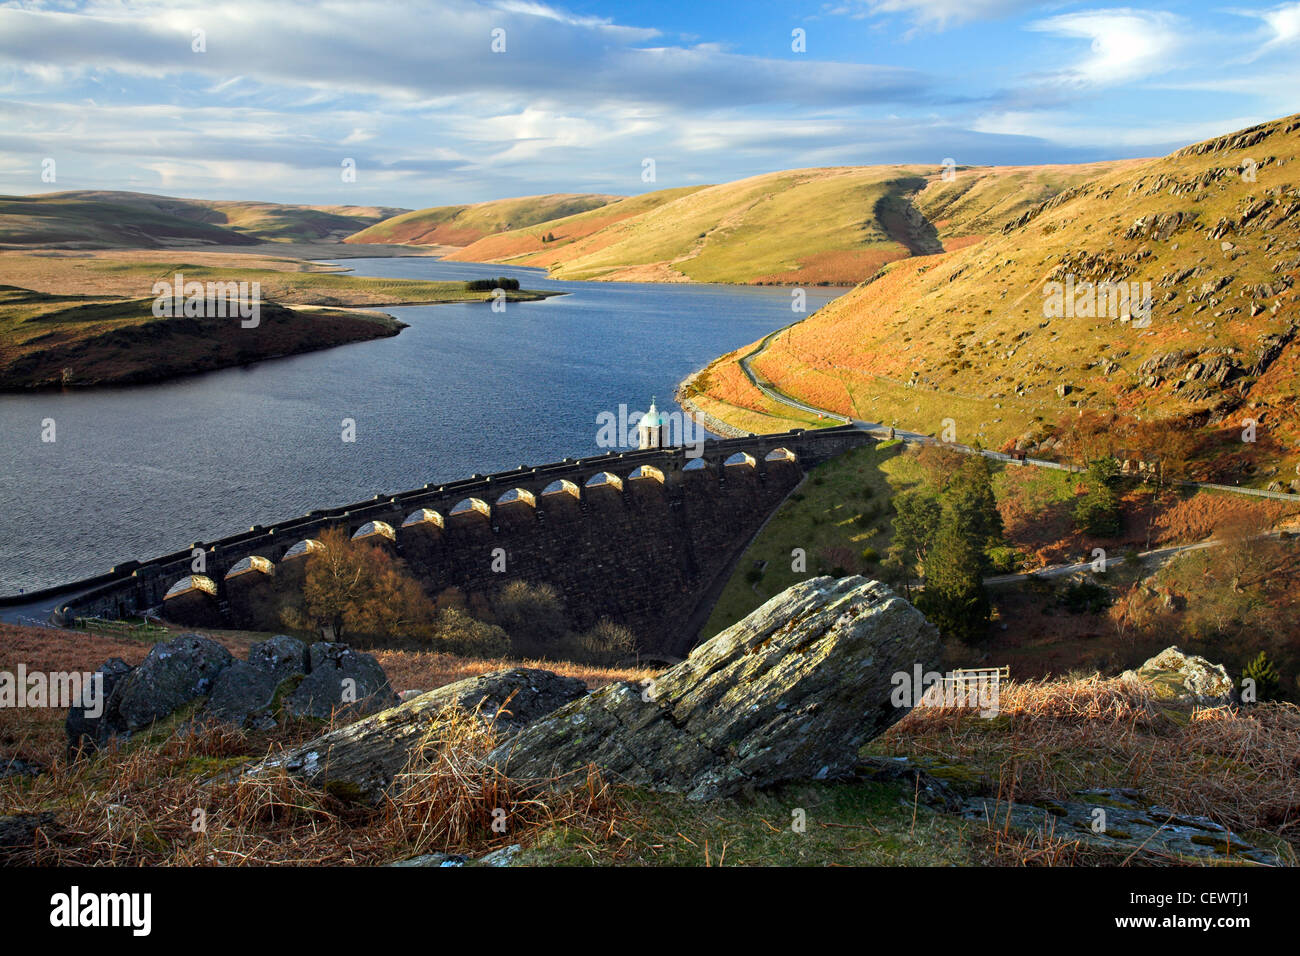 Craig Goch reservoir in Elan Valley. It was built to provide water for the people of Birmingham. Stock Photo